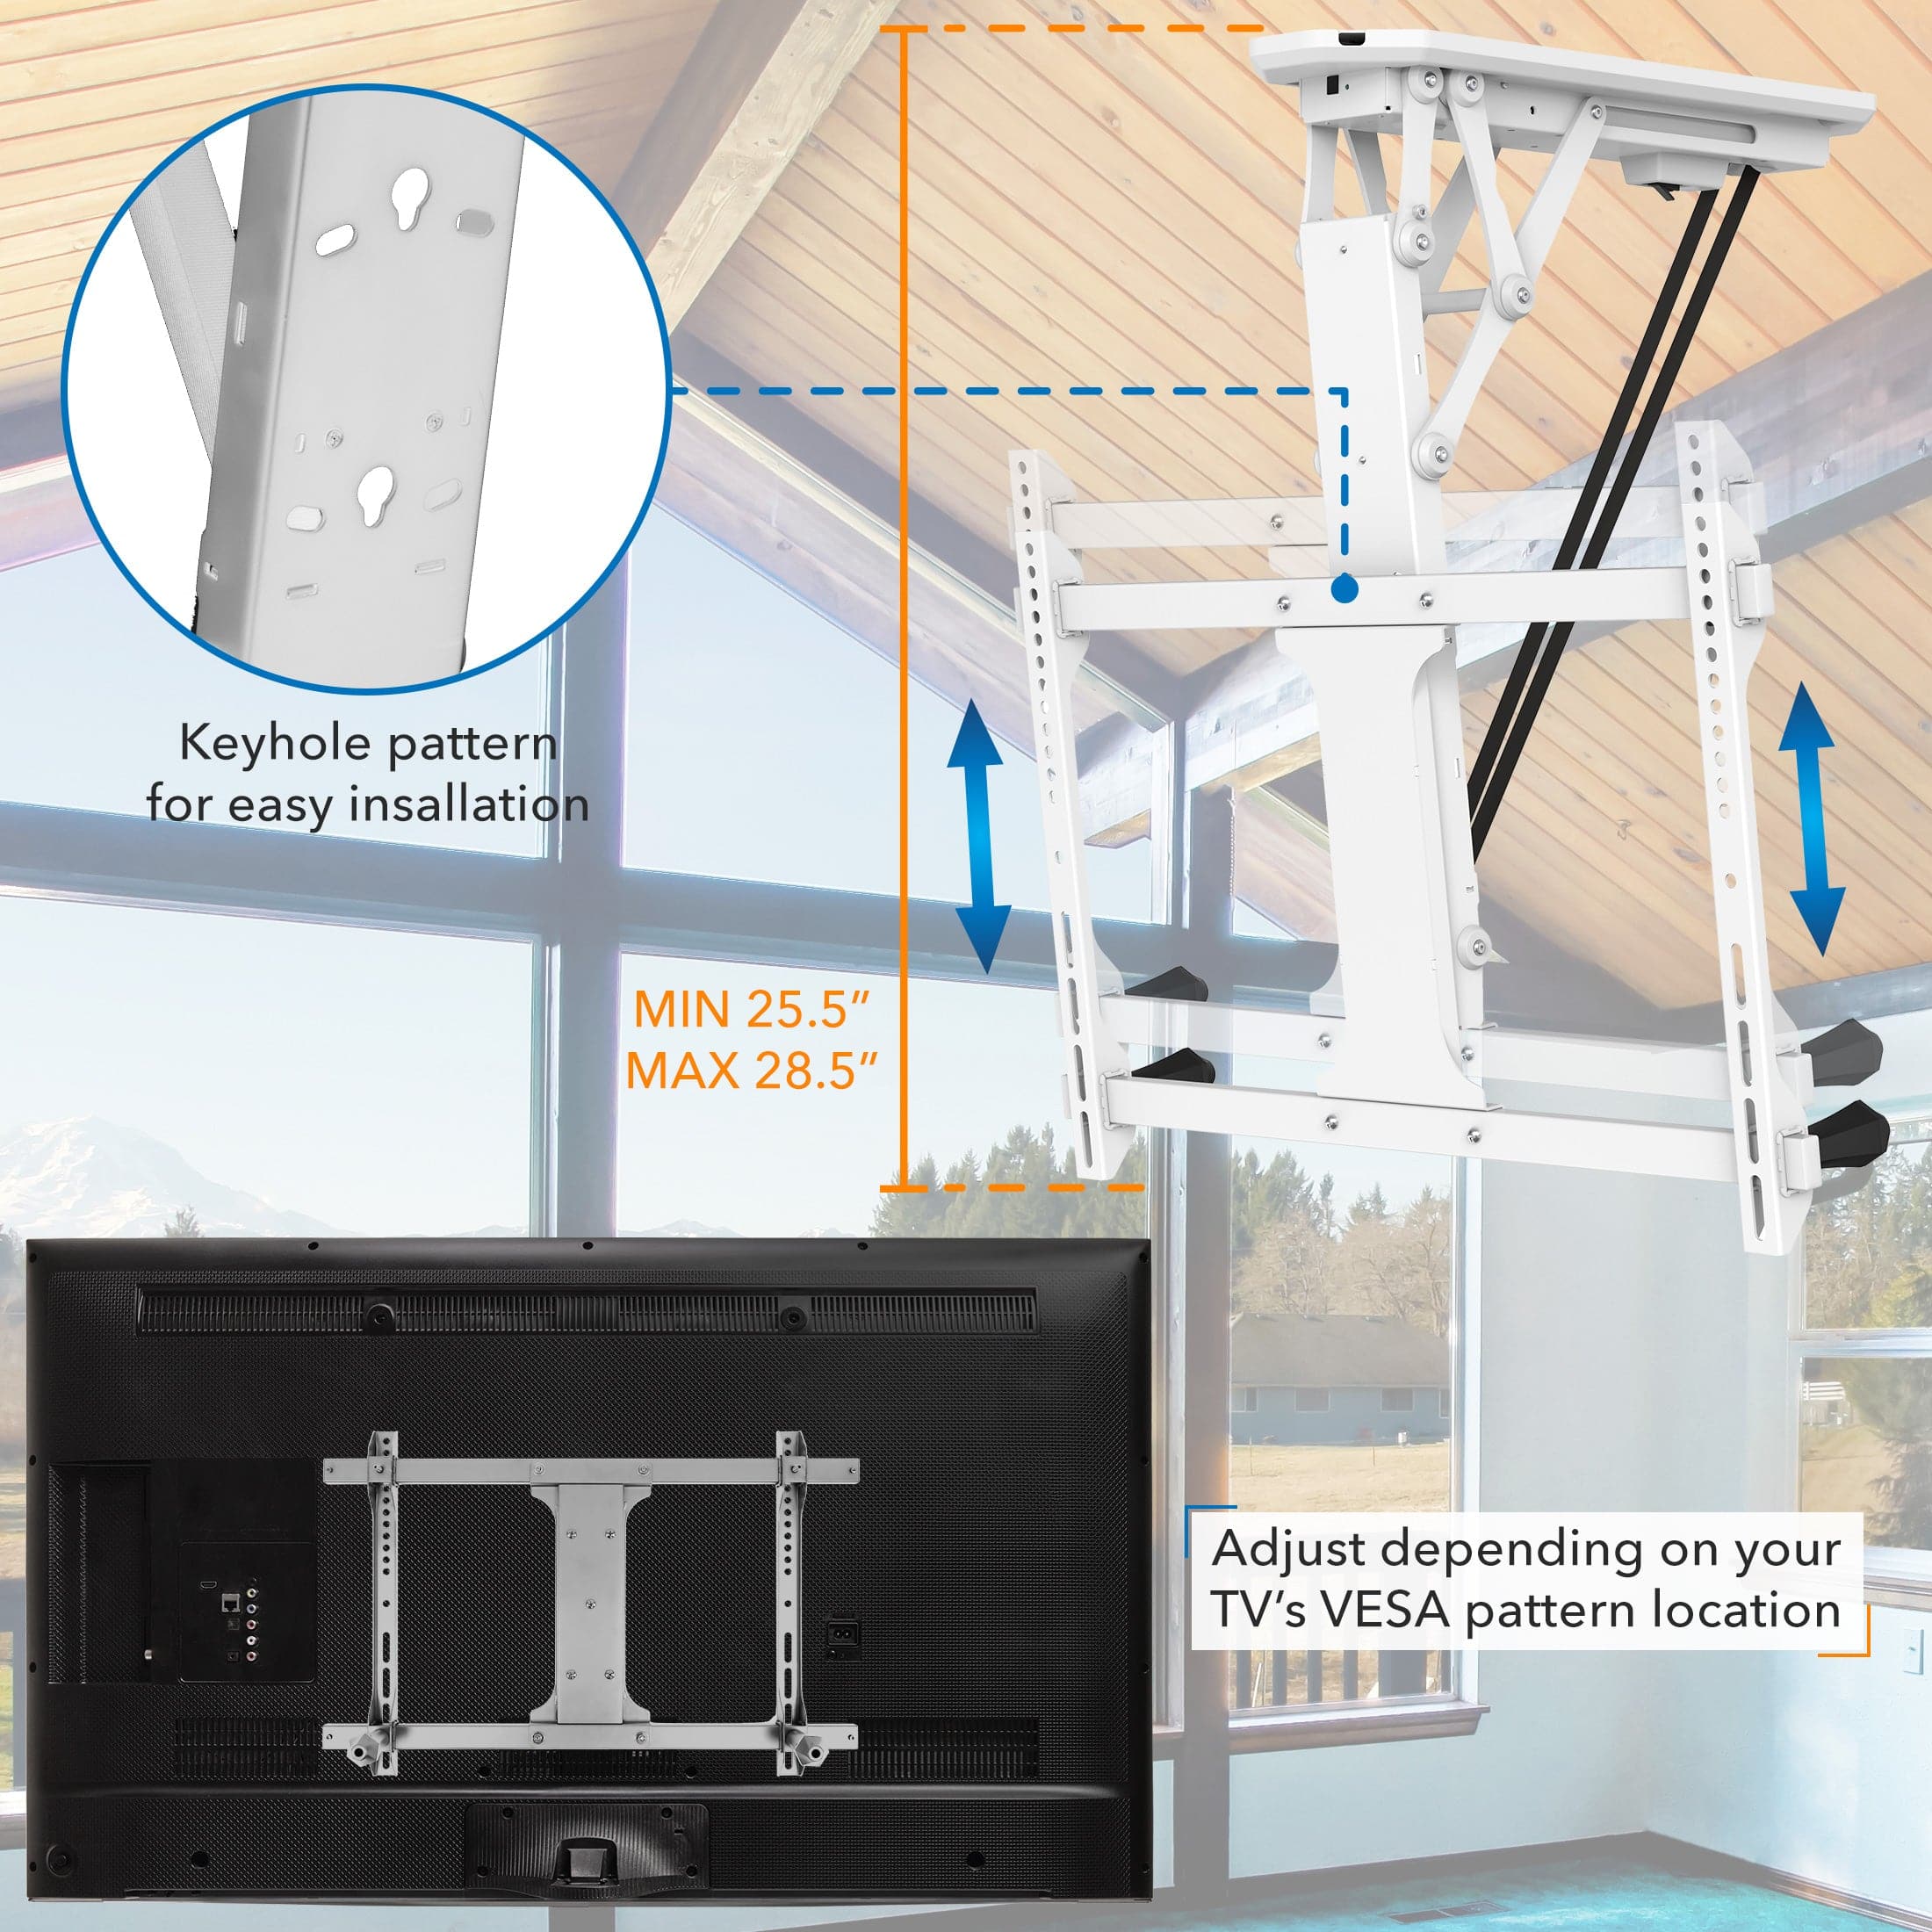 Motorized Ceiling TV Mount with Remote and App Controller